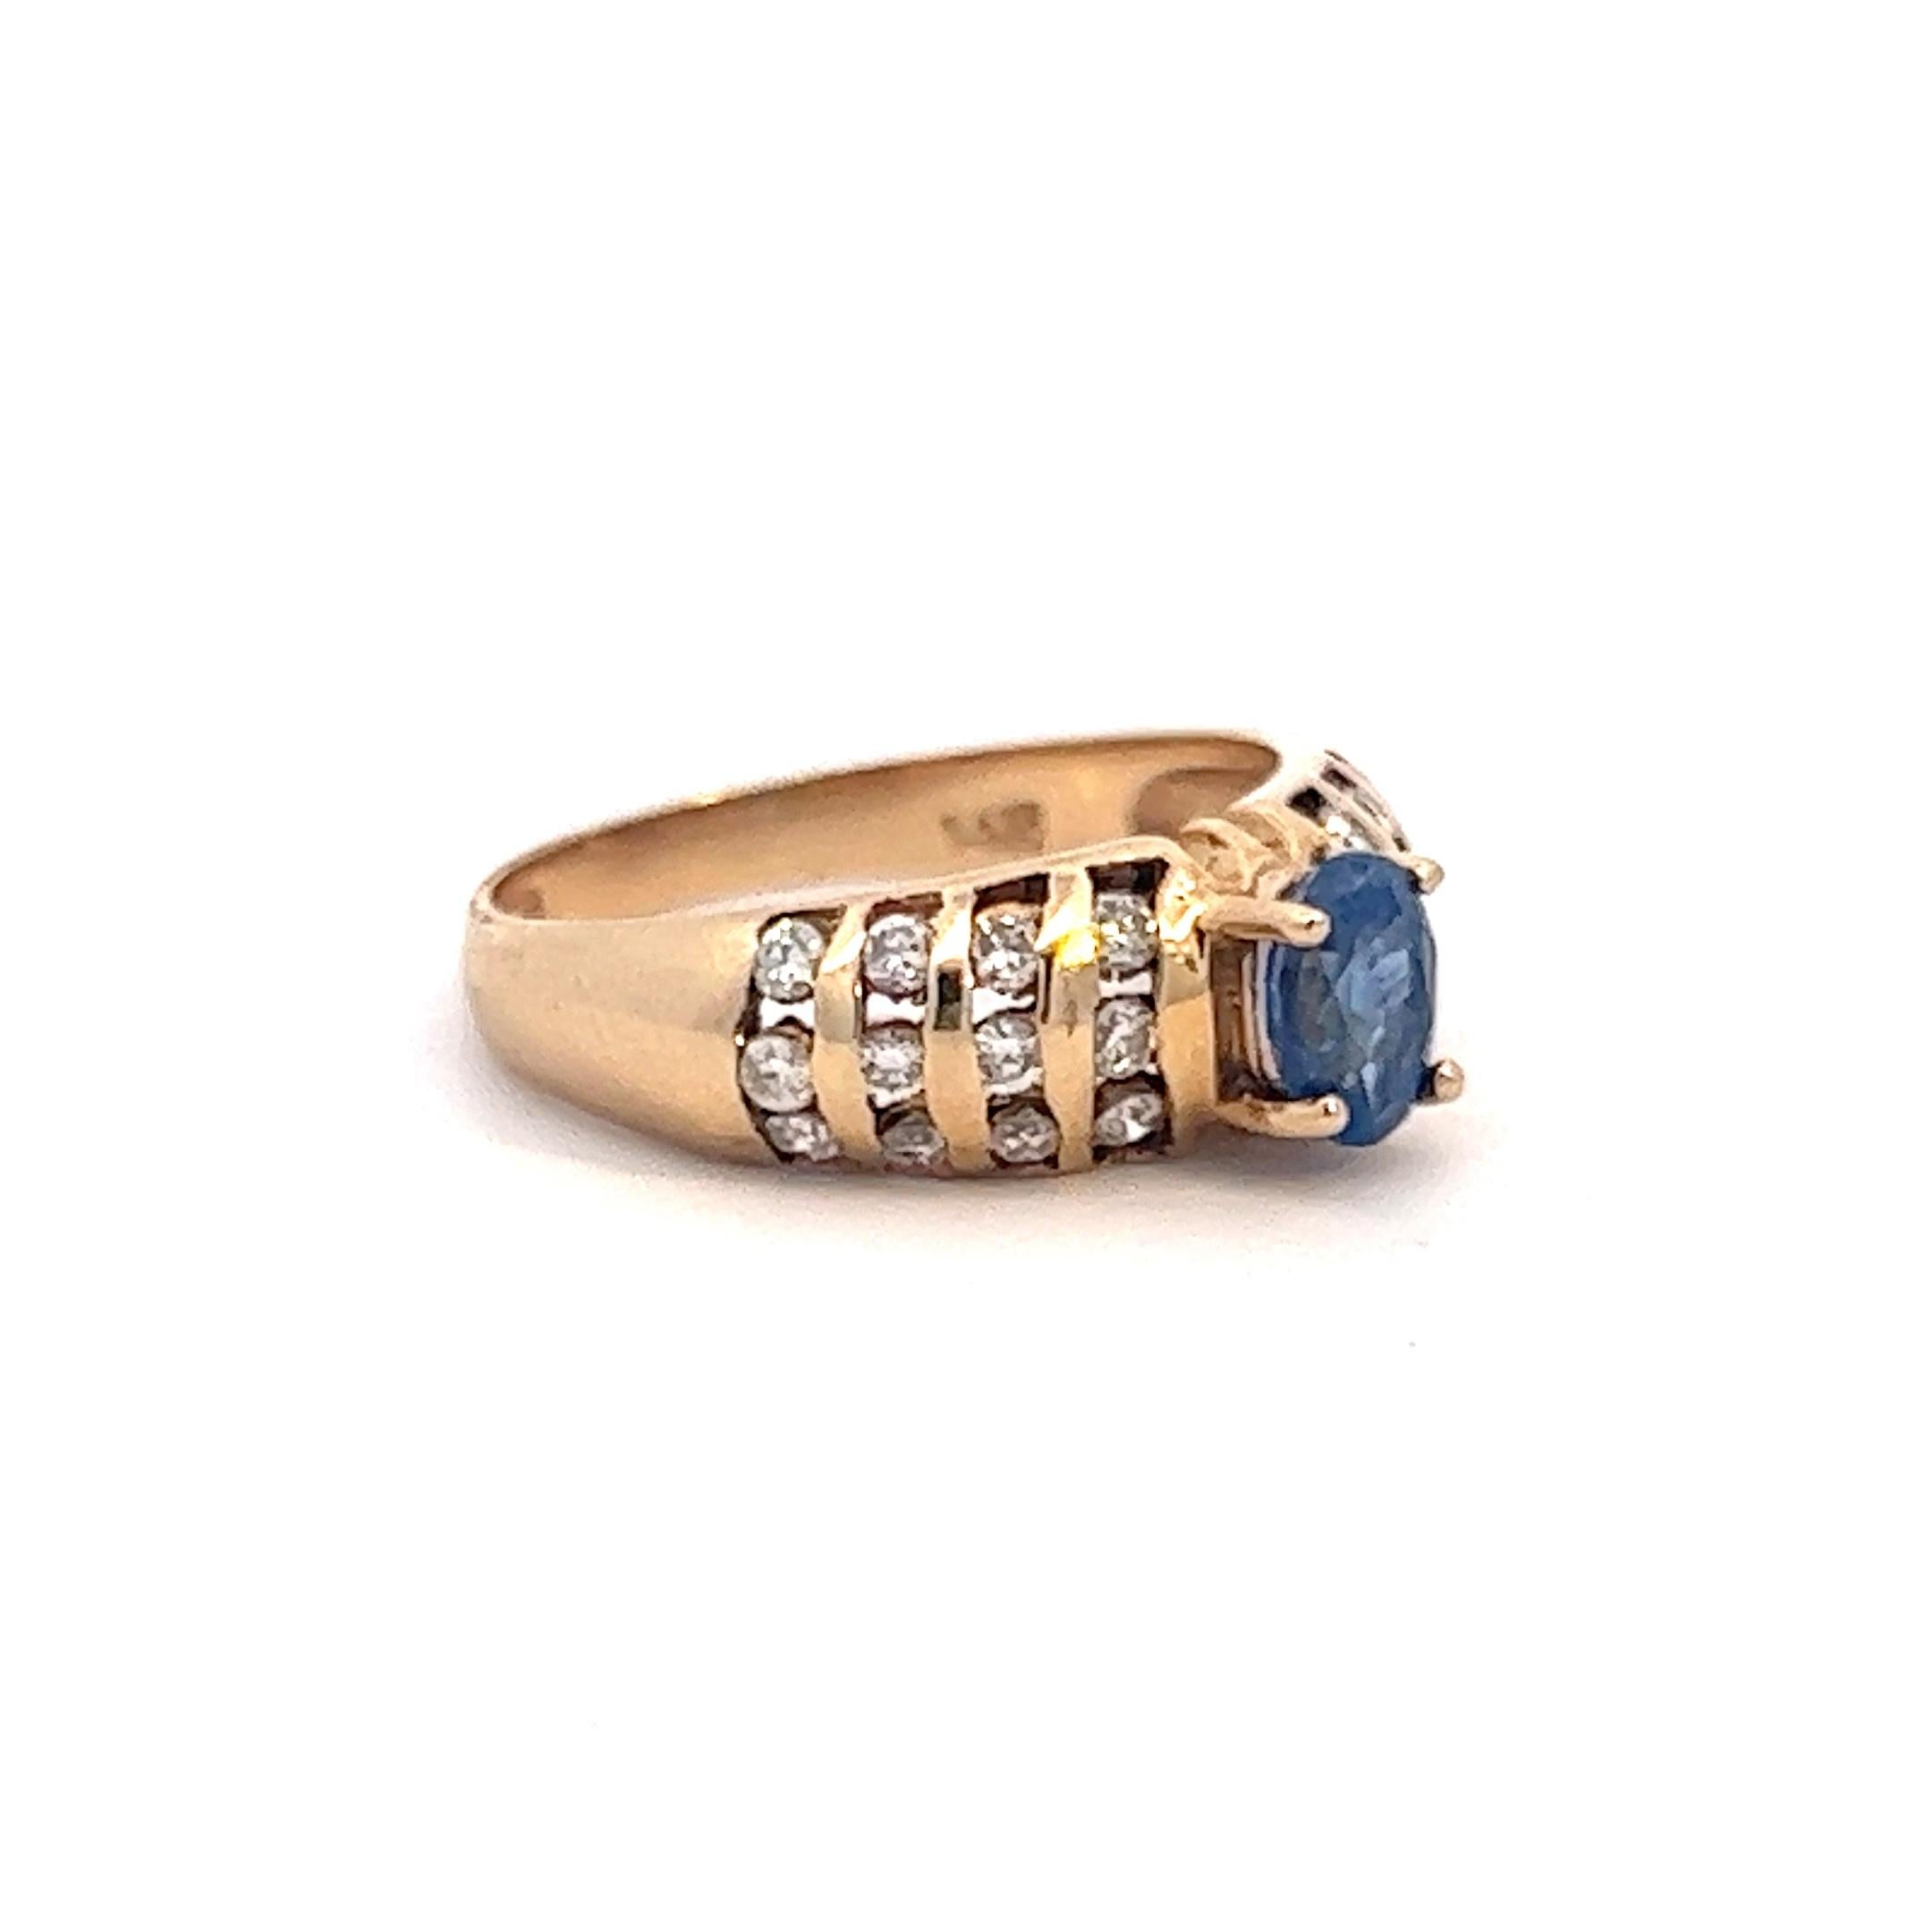 A vintage 14k yellow gold ring presenting an incredible sapphire among several rows of diamonds. The sapphire weighs approximately 1.17 carats and together, the diamonds weigh approximately .38 ctw (all stones measured in setting). The ring is a